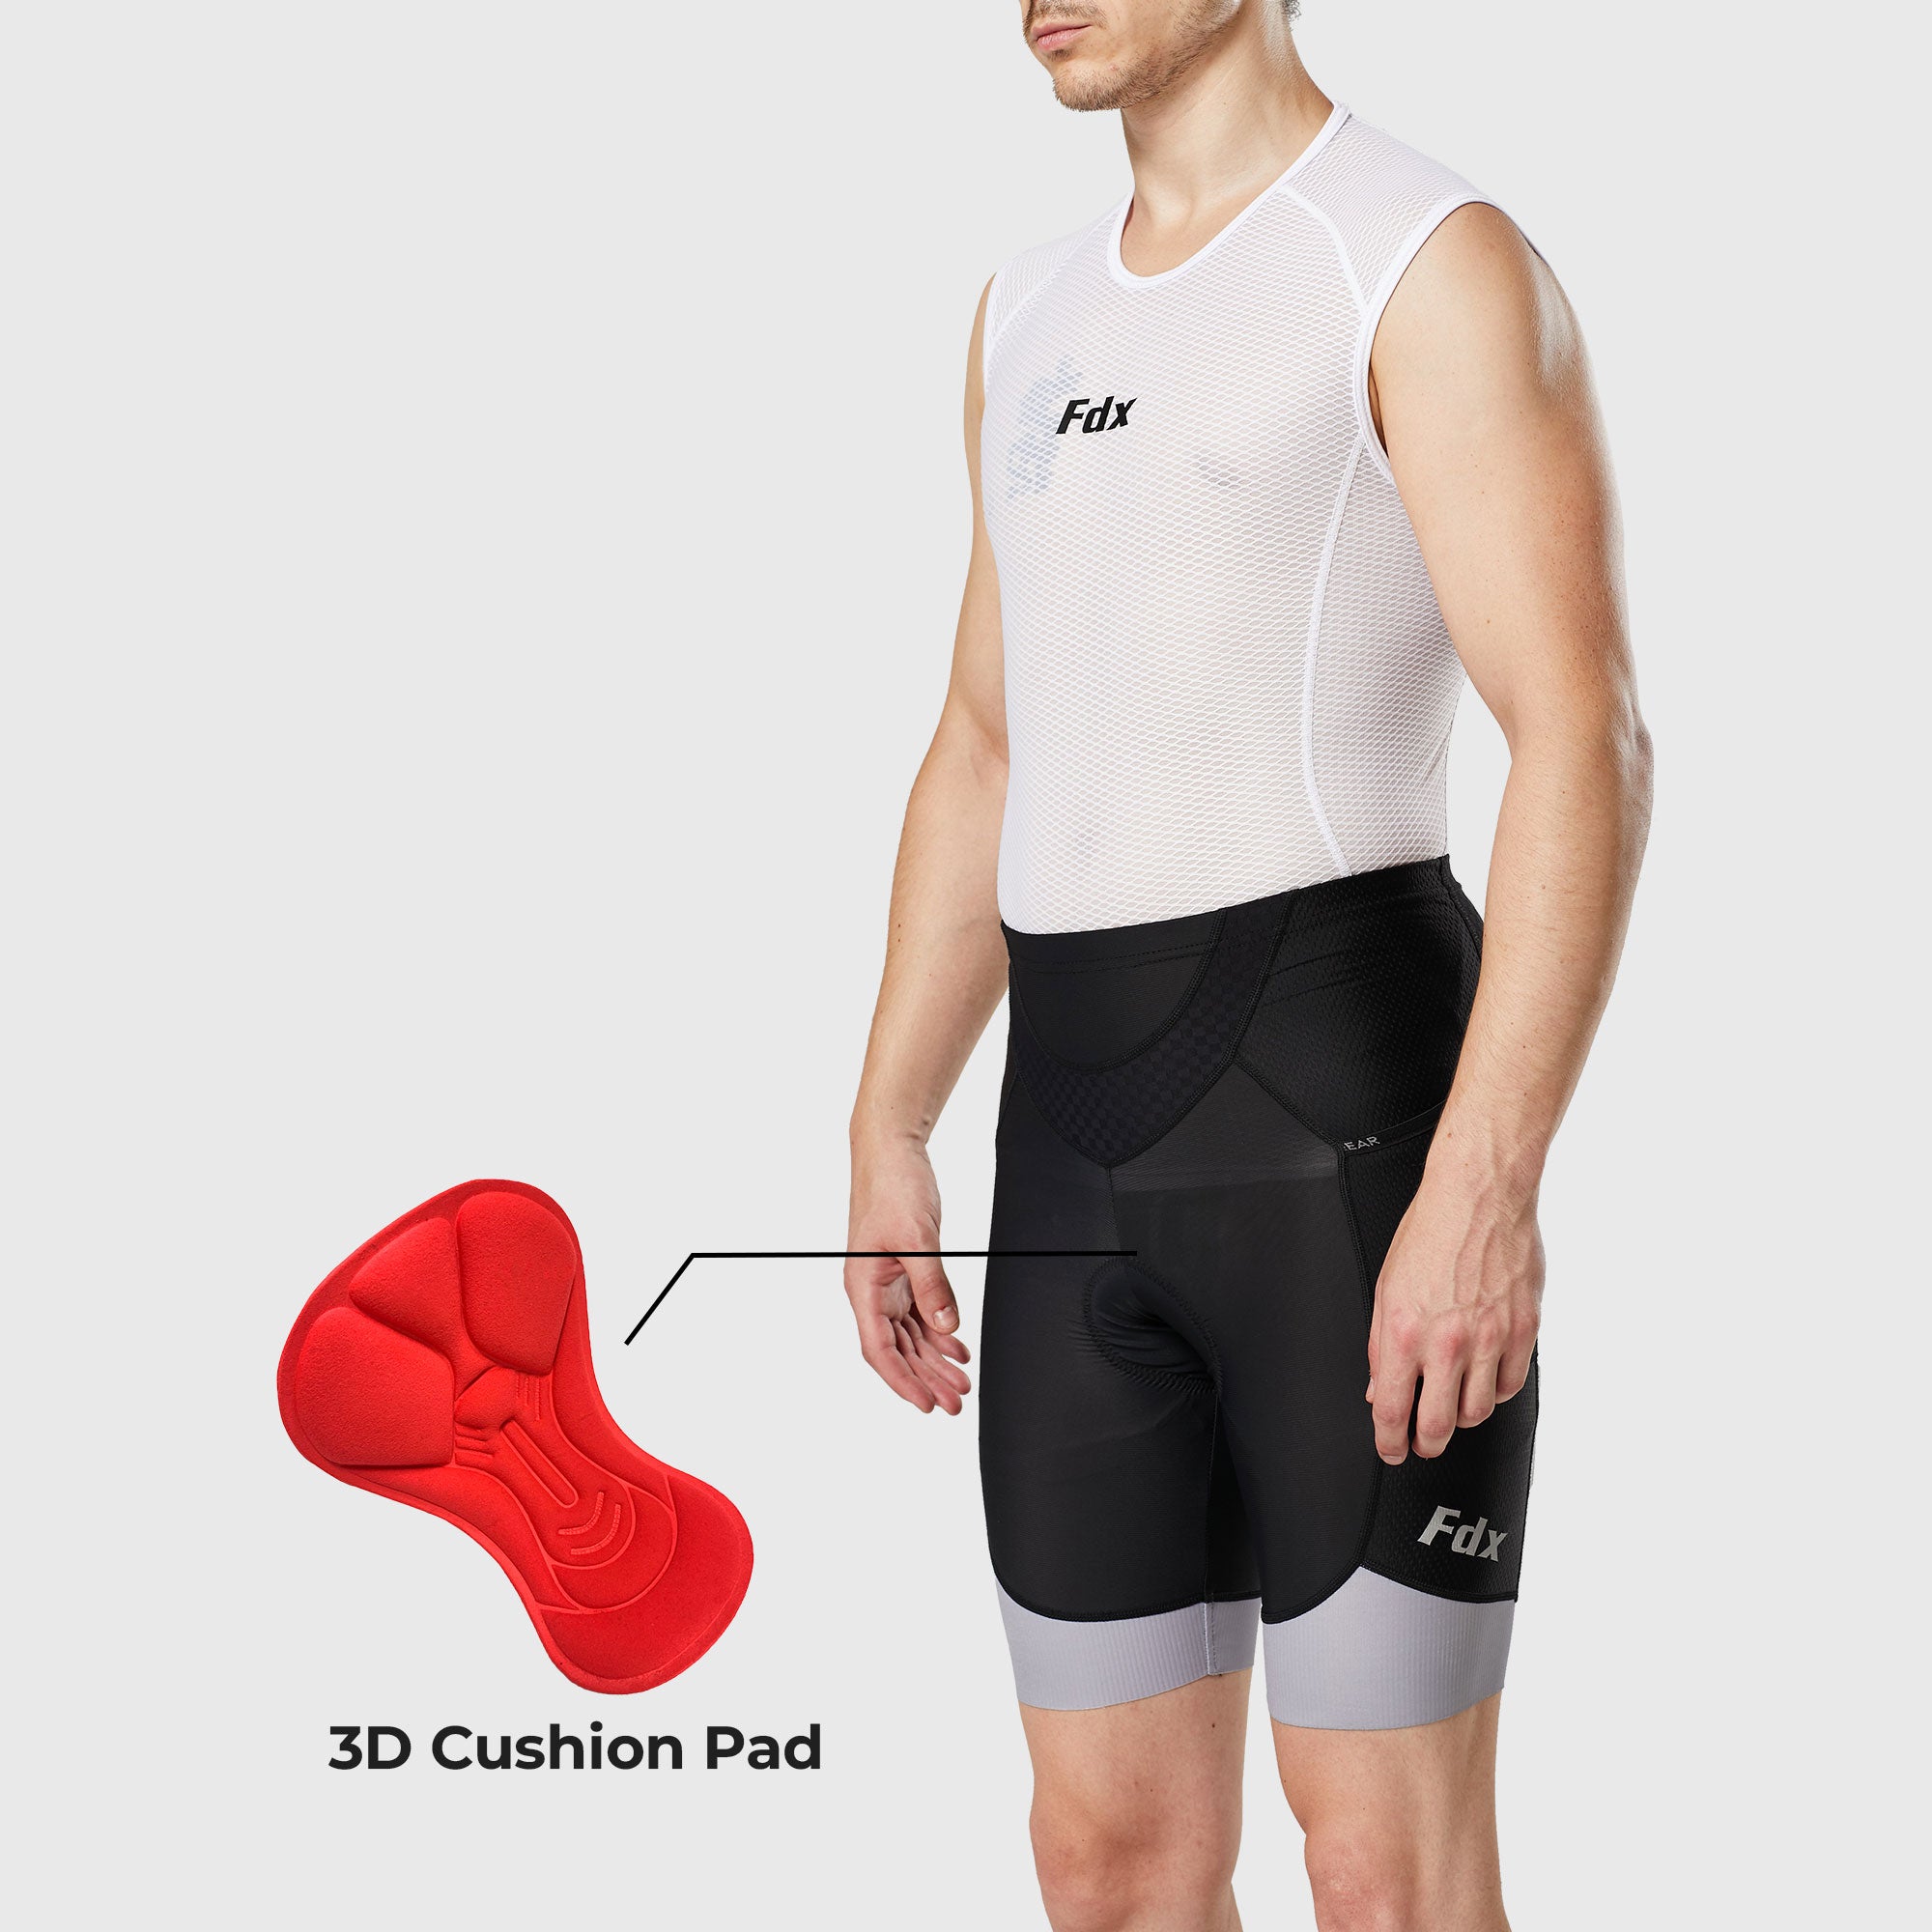 Men’s Black & Gray Cycling Shorts 3D Gel Padded comfortable road bike shorts - Breathable Quick Dry biking shorts, ultra-lightweight shorts with pockets